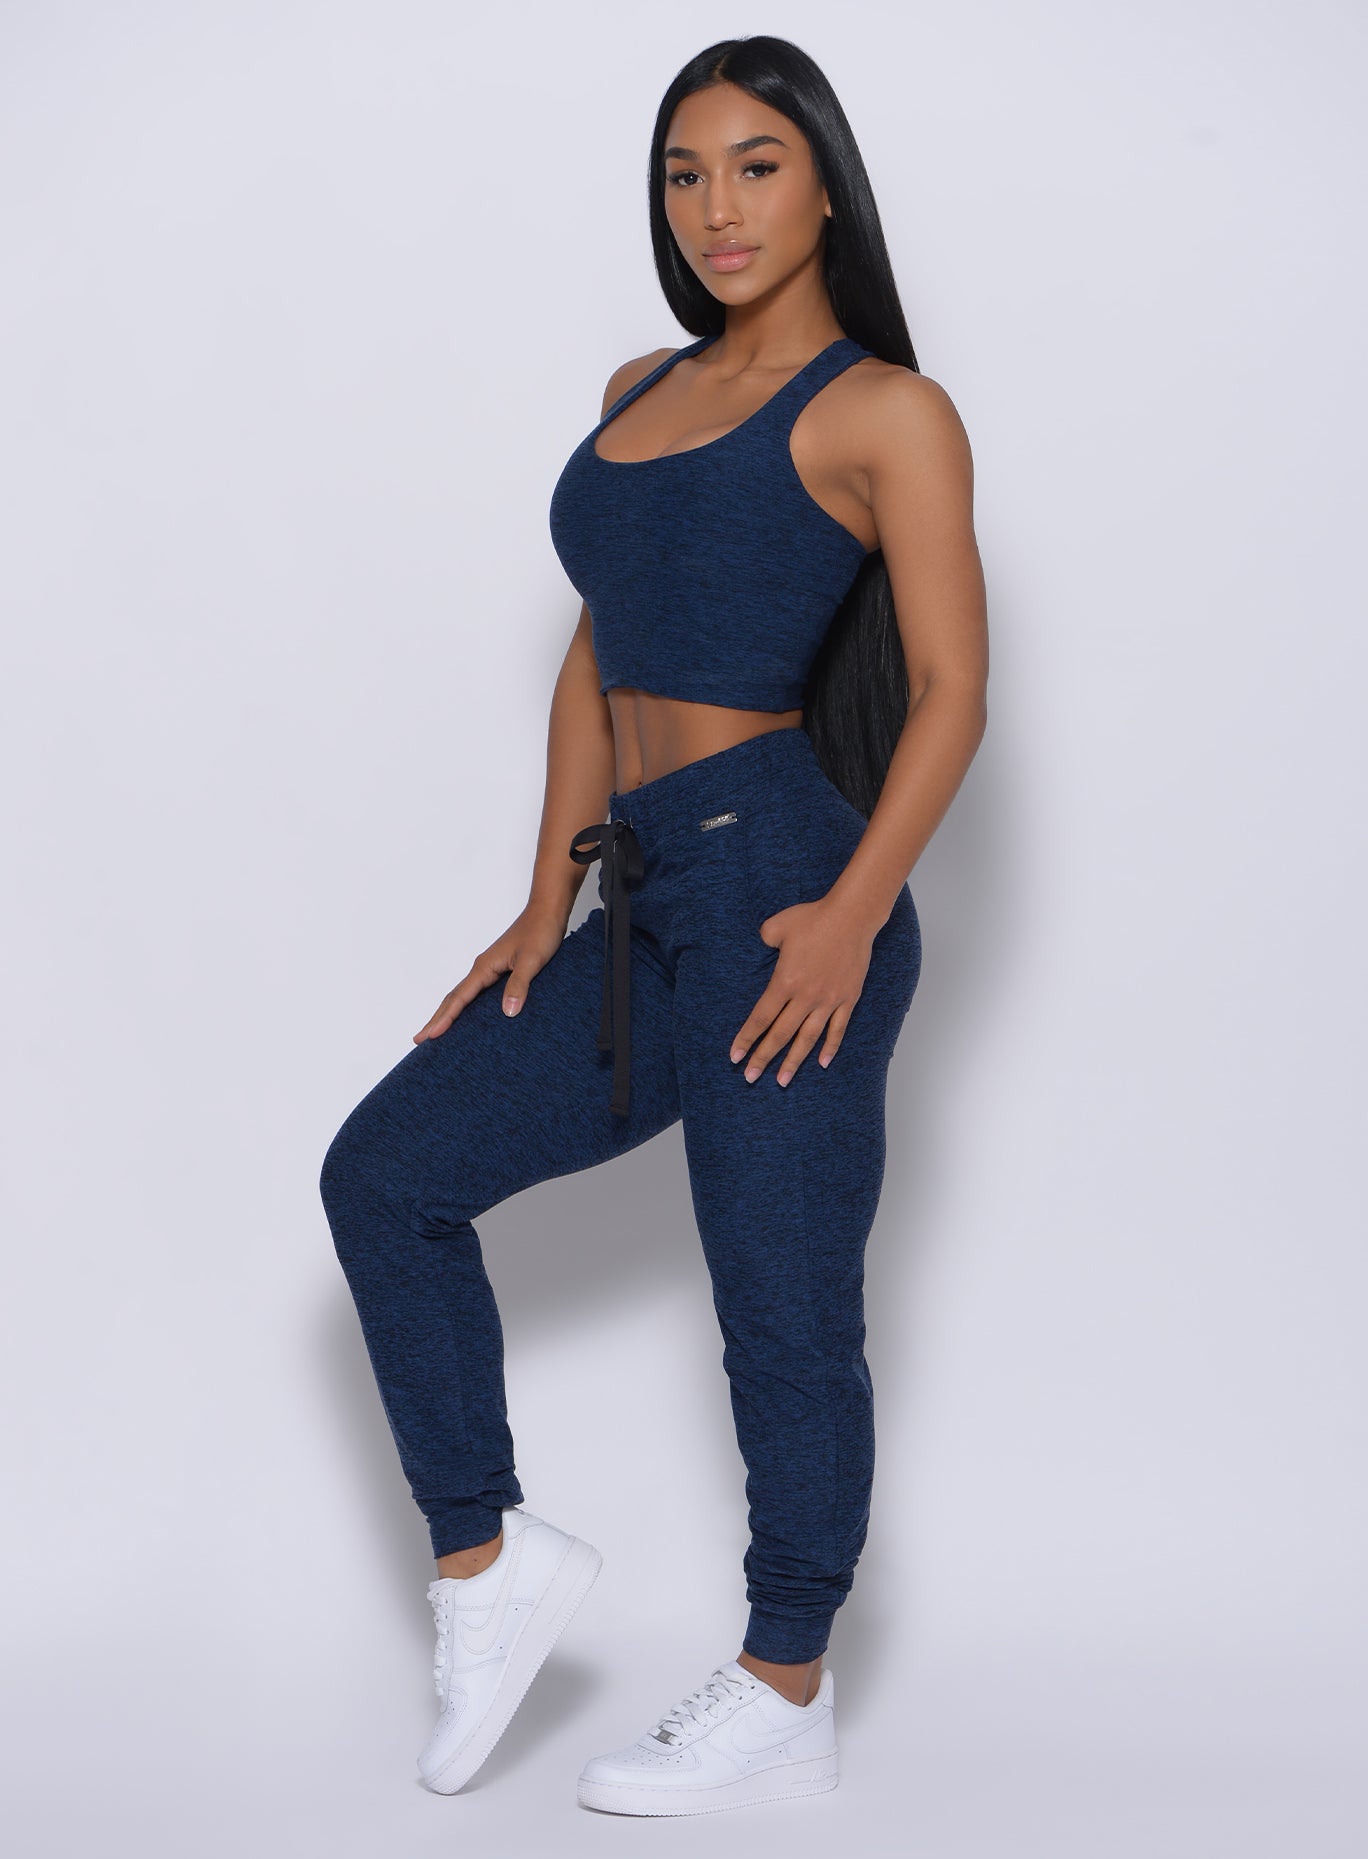 Left side profile view of a model angled left wearing our signature joggers in sapphire blue color and a matching bra